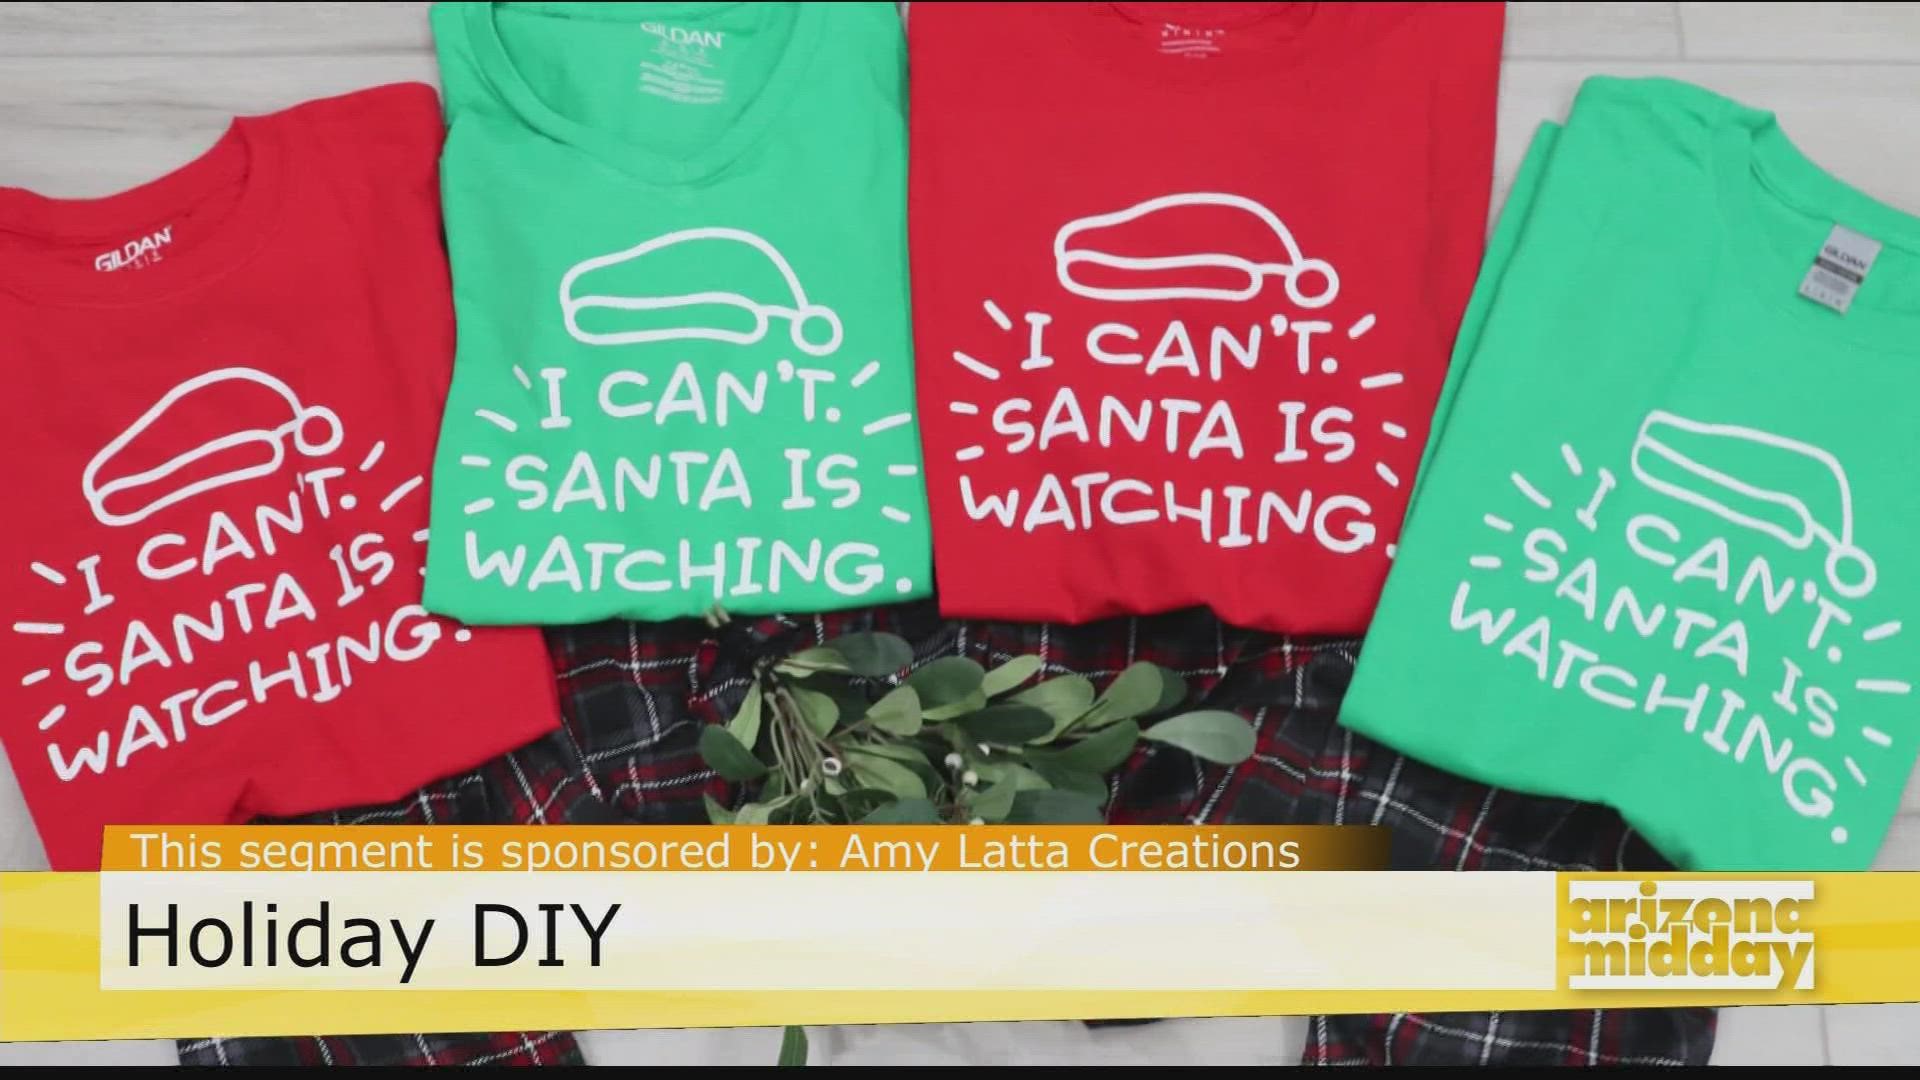 Amy Latta Joins us for fun DIY holiday gifts for the whole family.